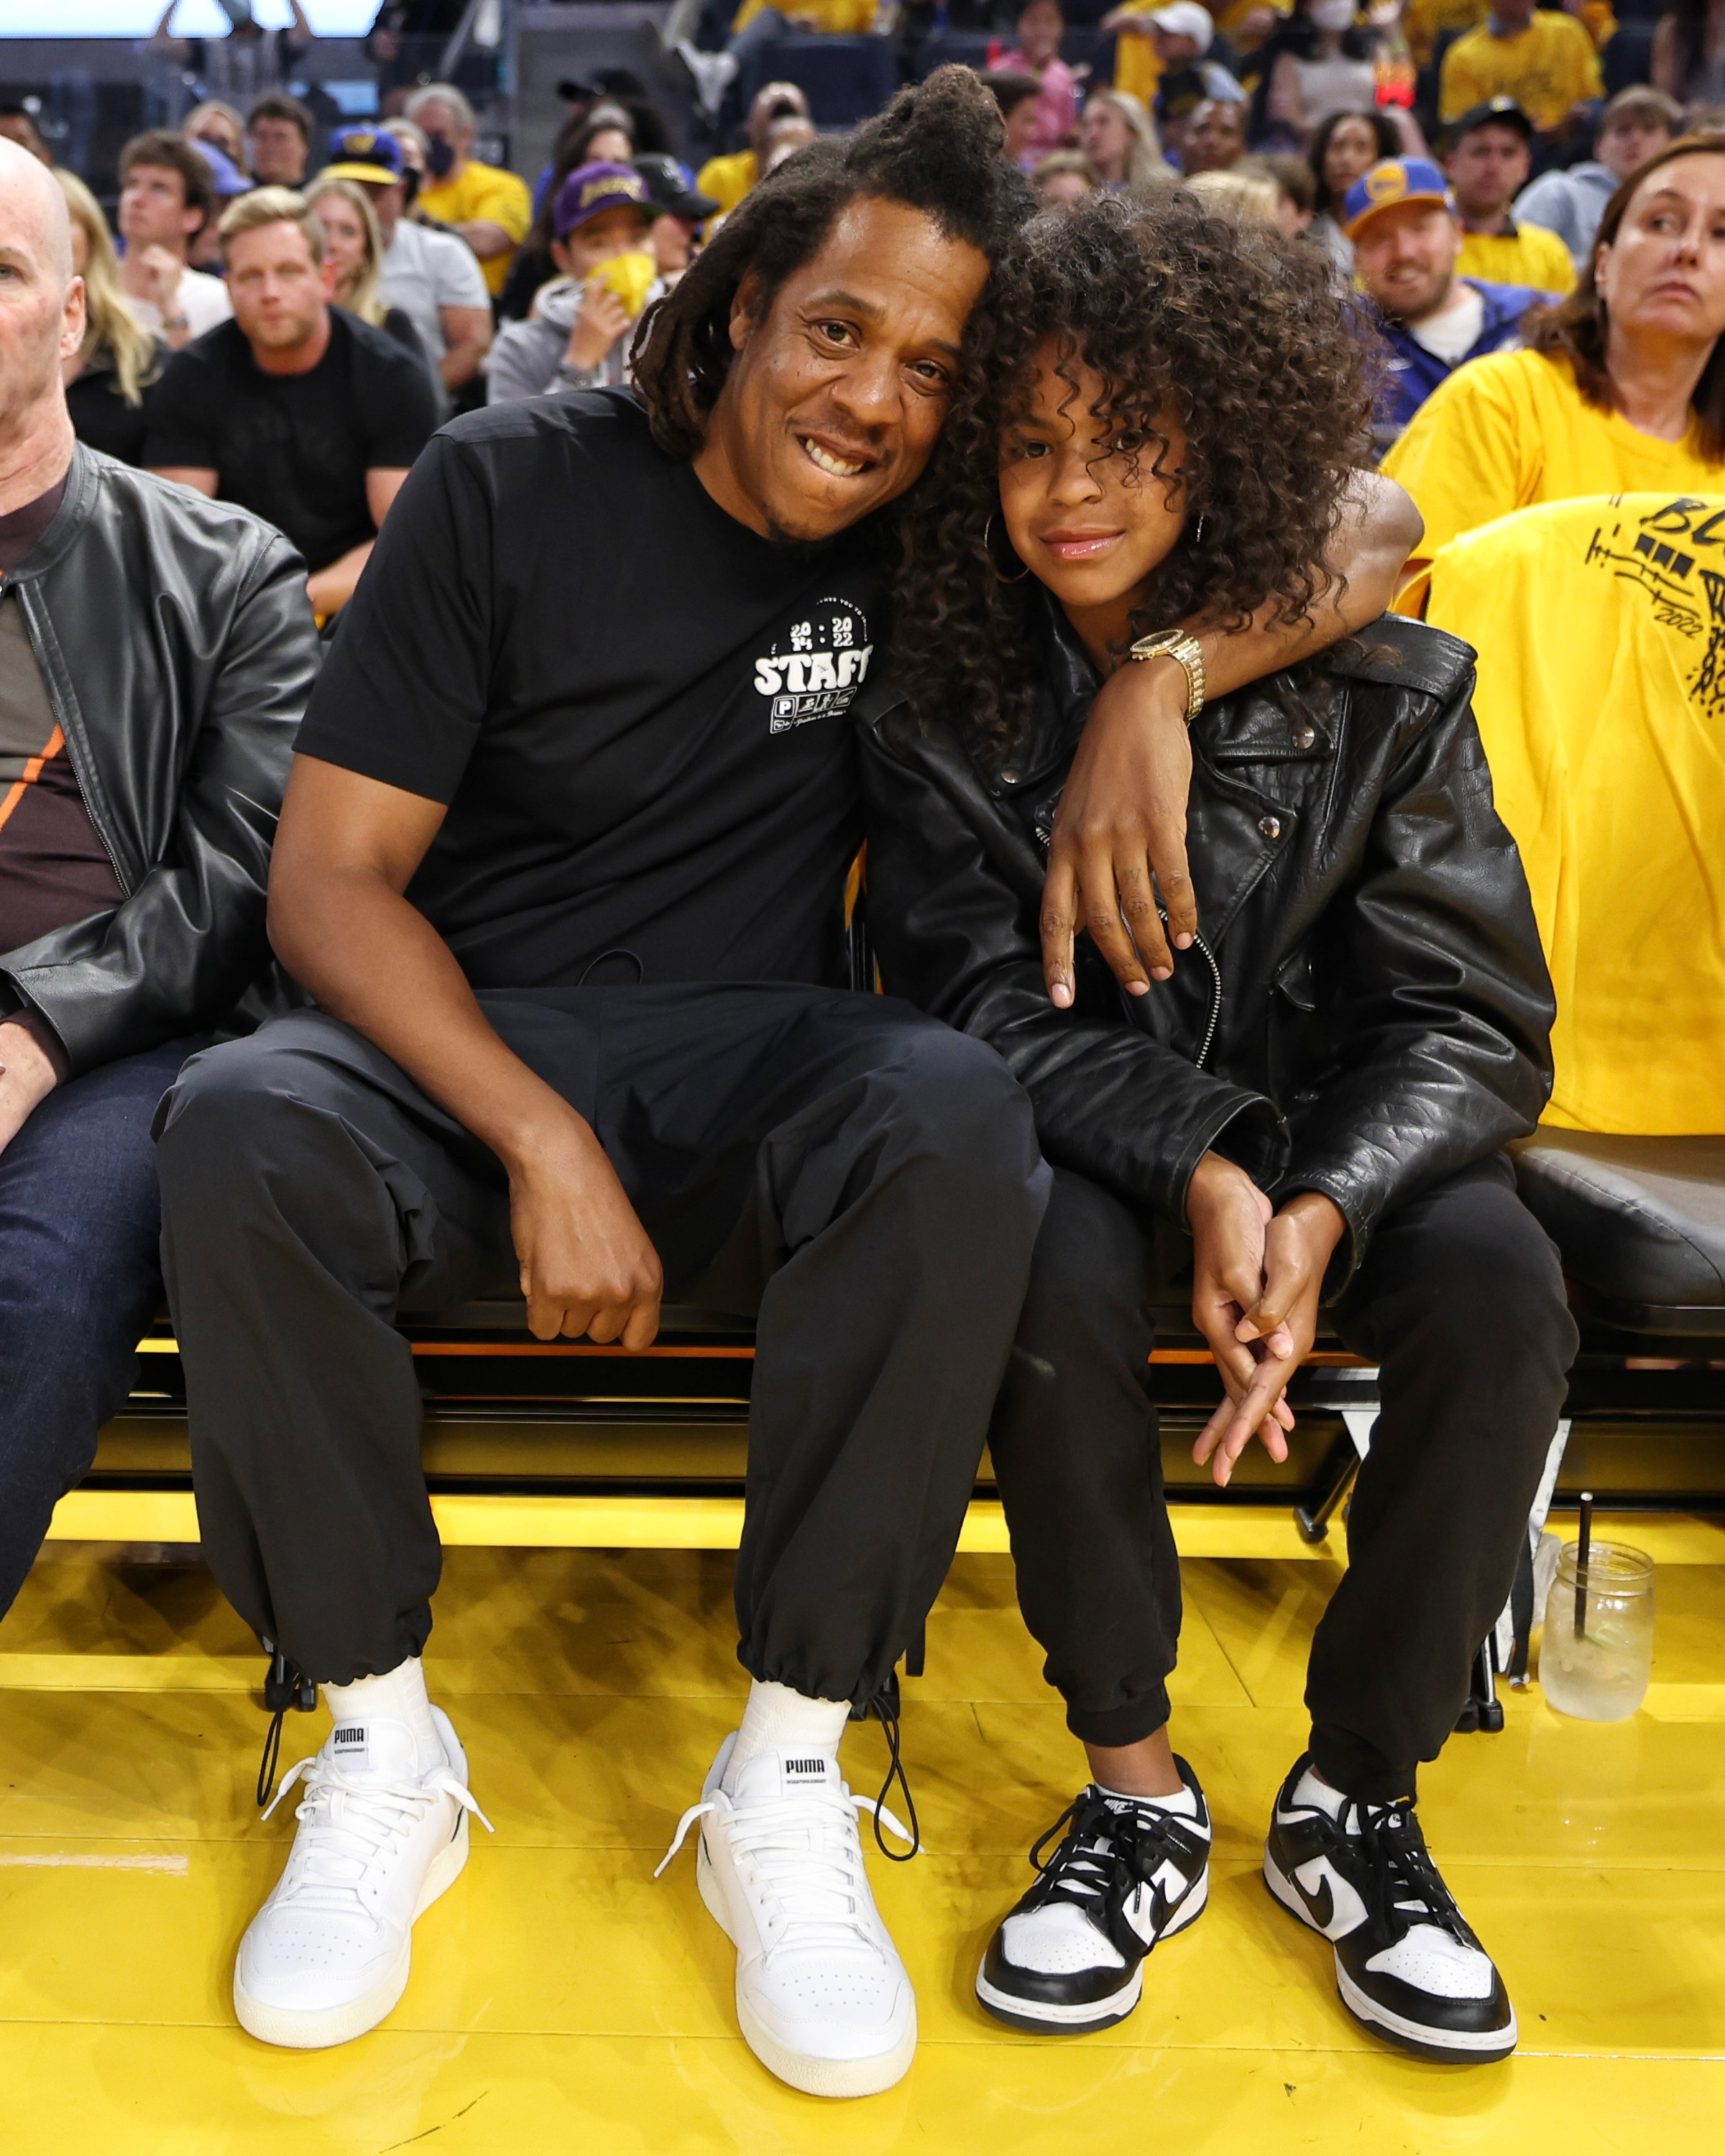 Jay-Z with his arm around Blue Ivy while sitting in courtside seats at a basketball game